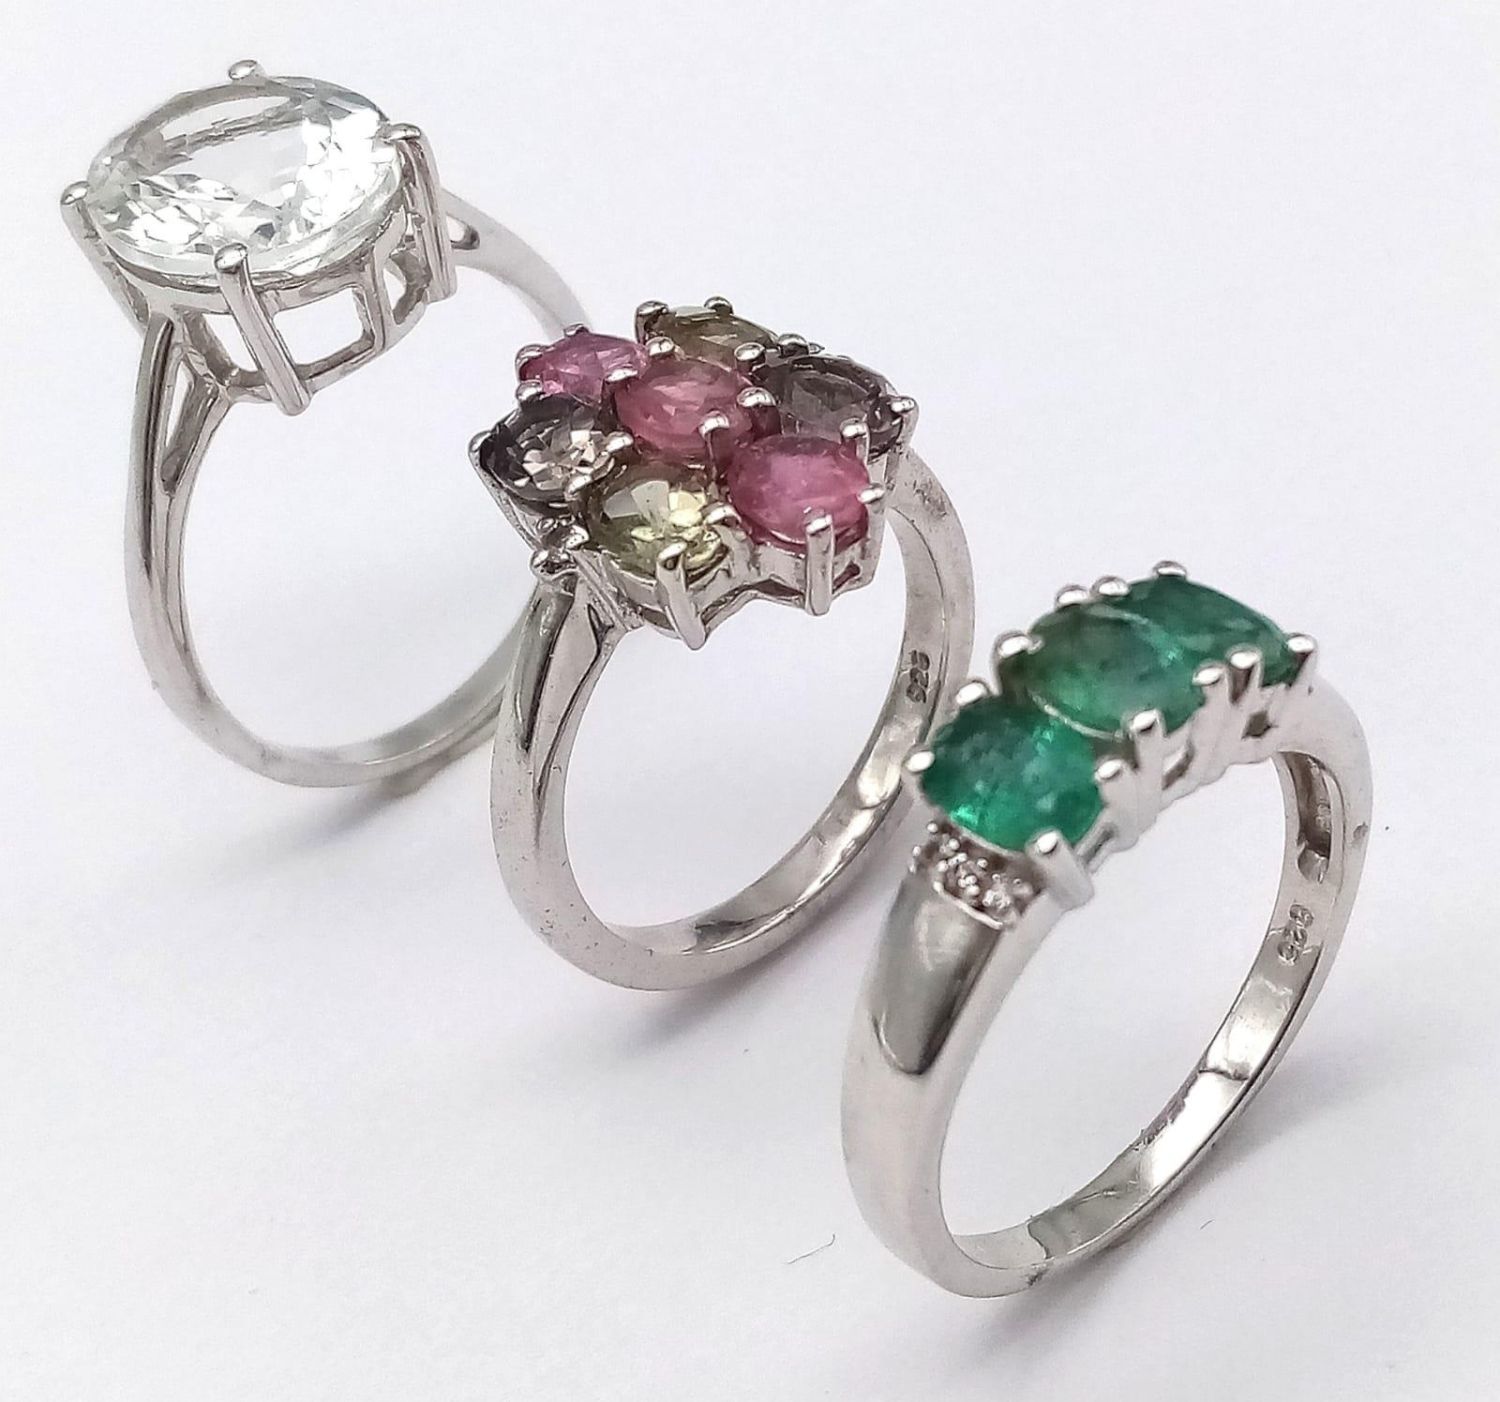 Three 925 Sterling Silver Gemstone Rings: Tourmaline - Size N, Topaz - Size S and Emerald - Size P. - Image 2 of 5